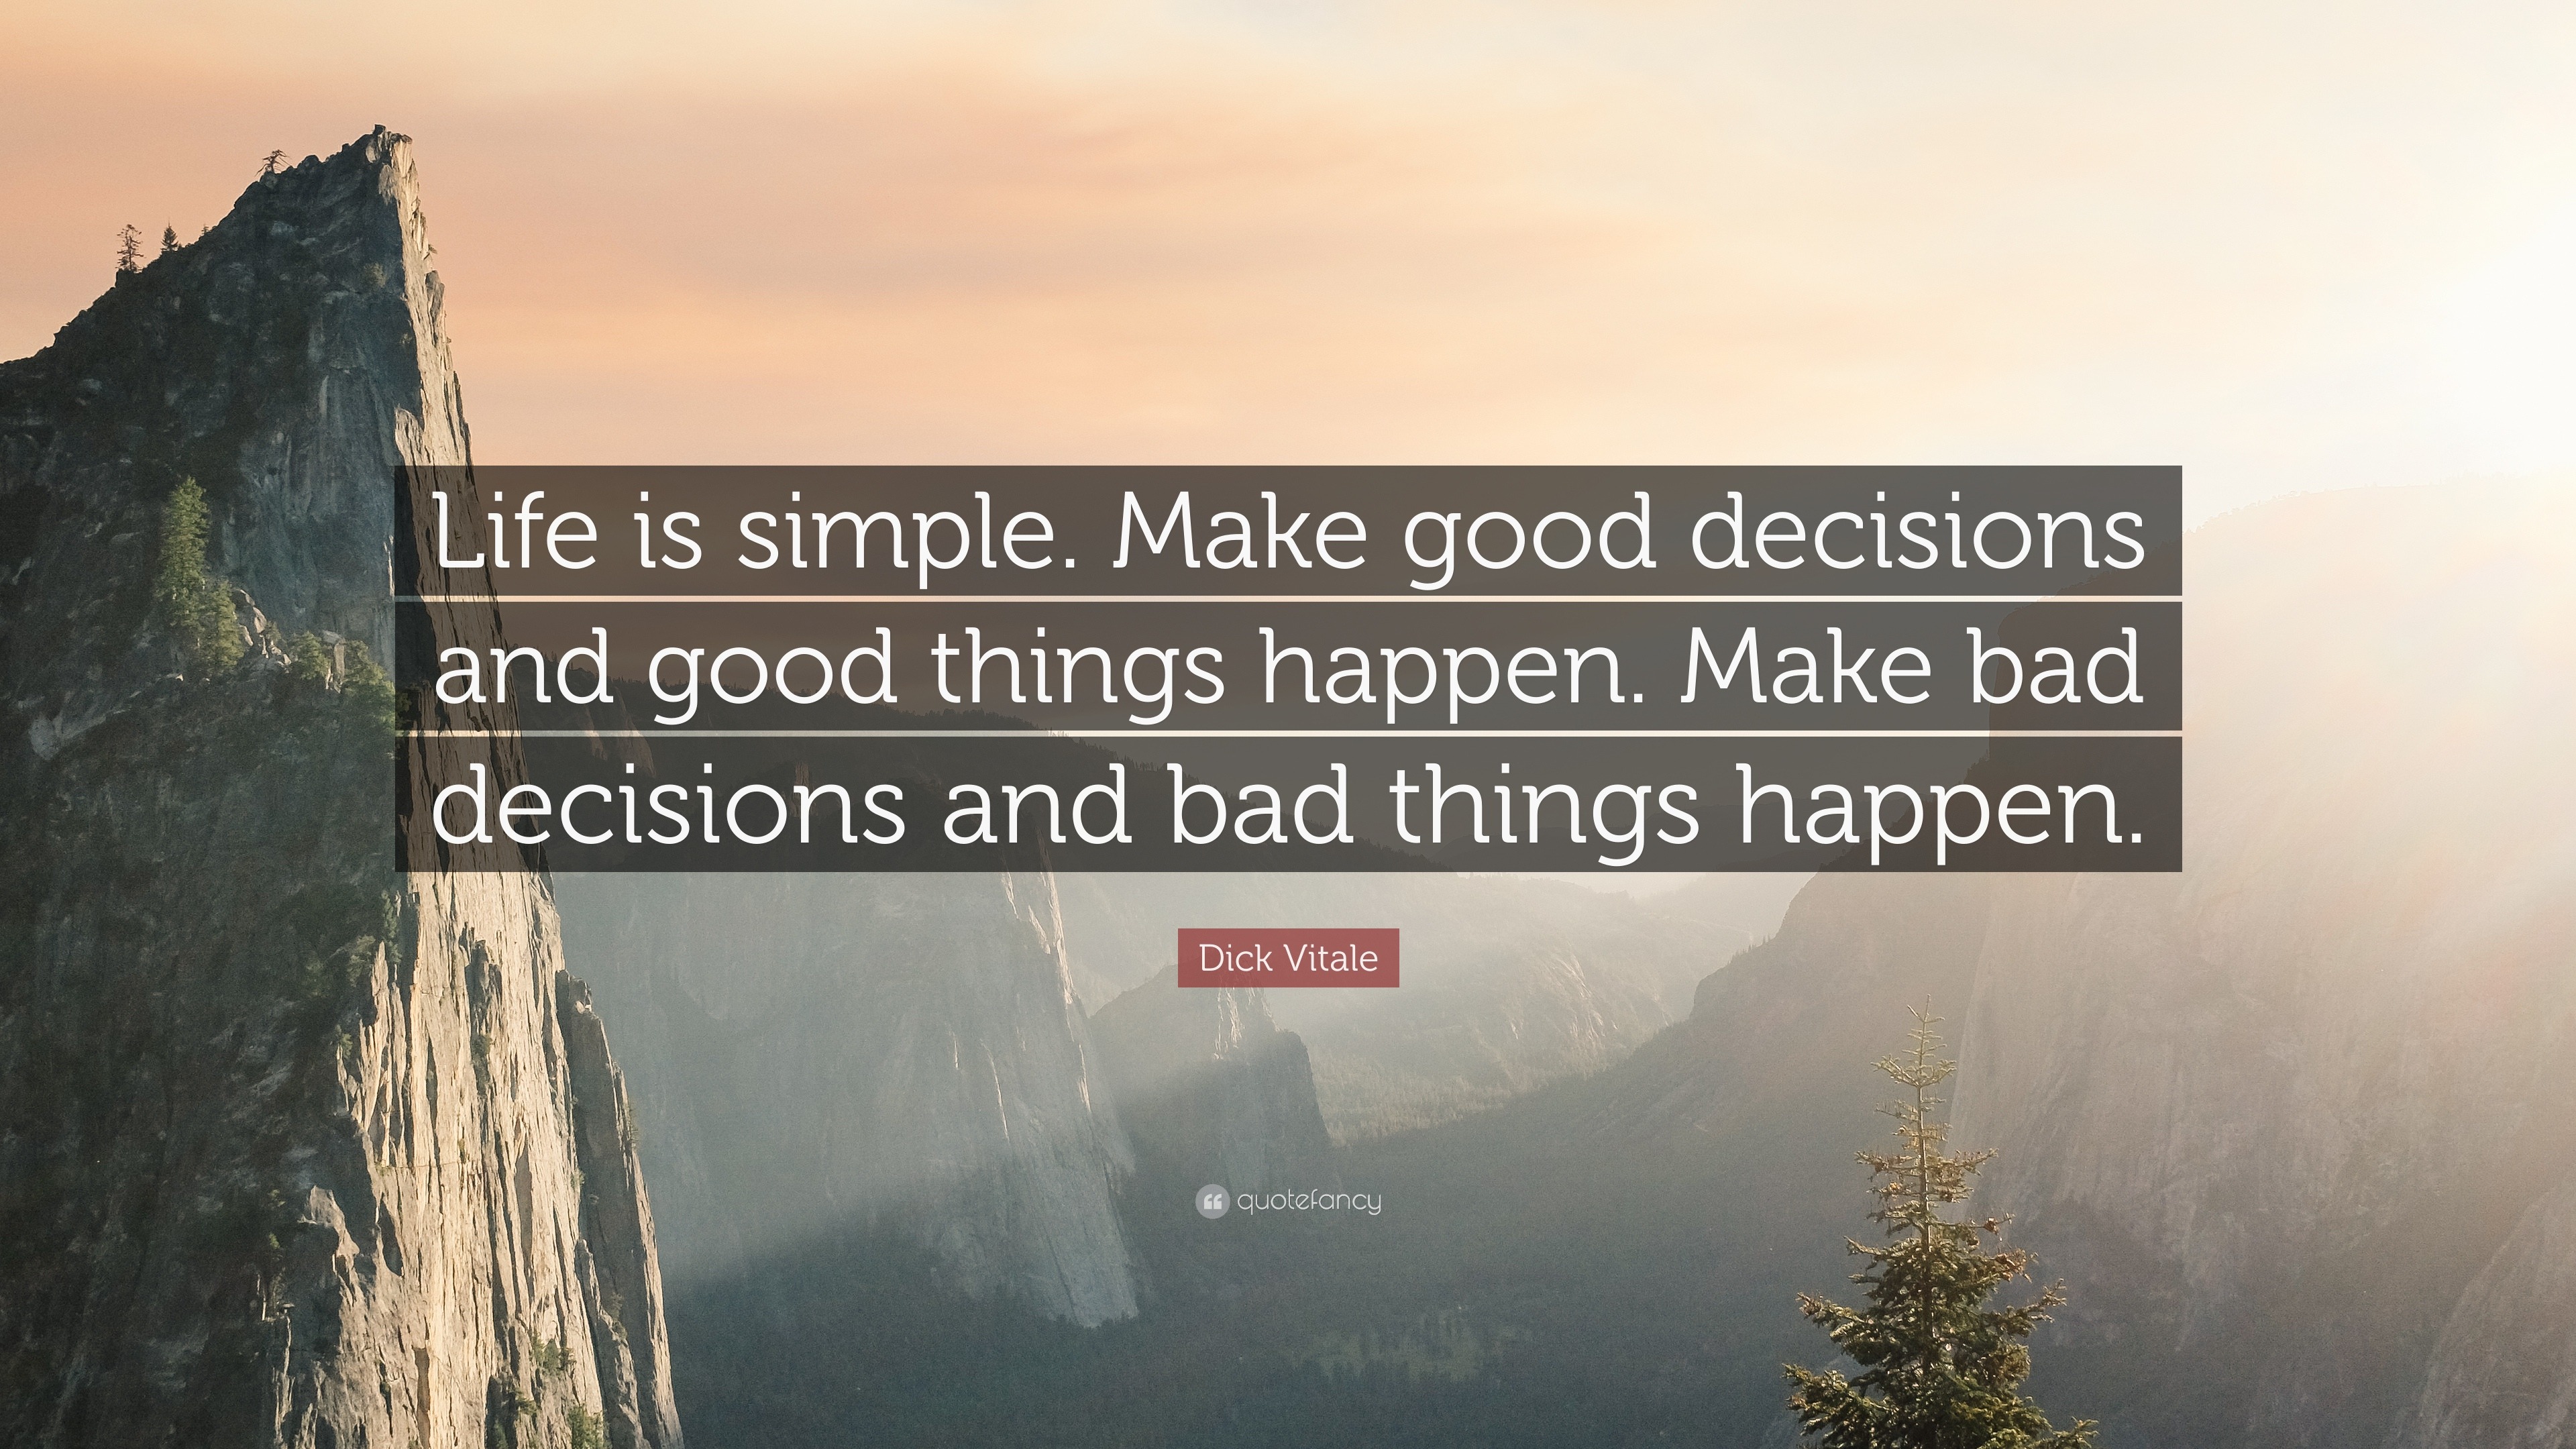 Dick Vitale Quote “Life is simple Make good decisions and good things happen